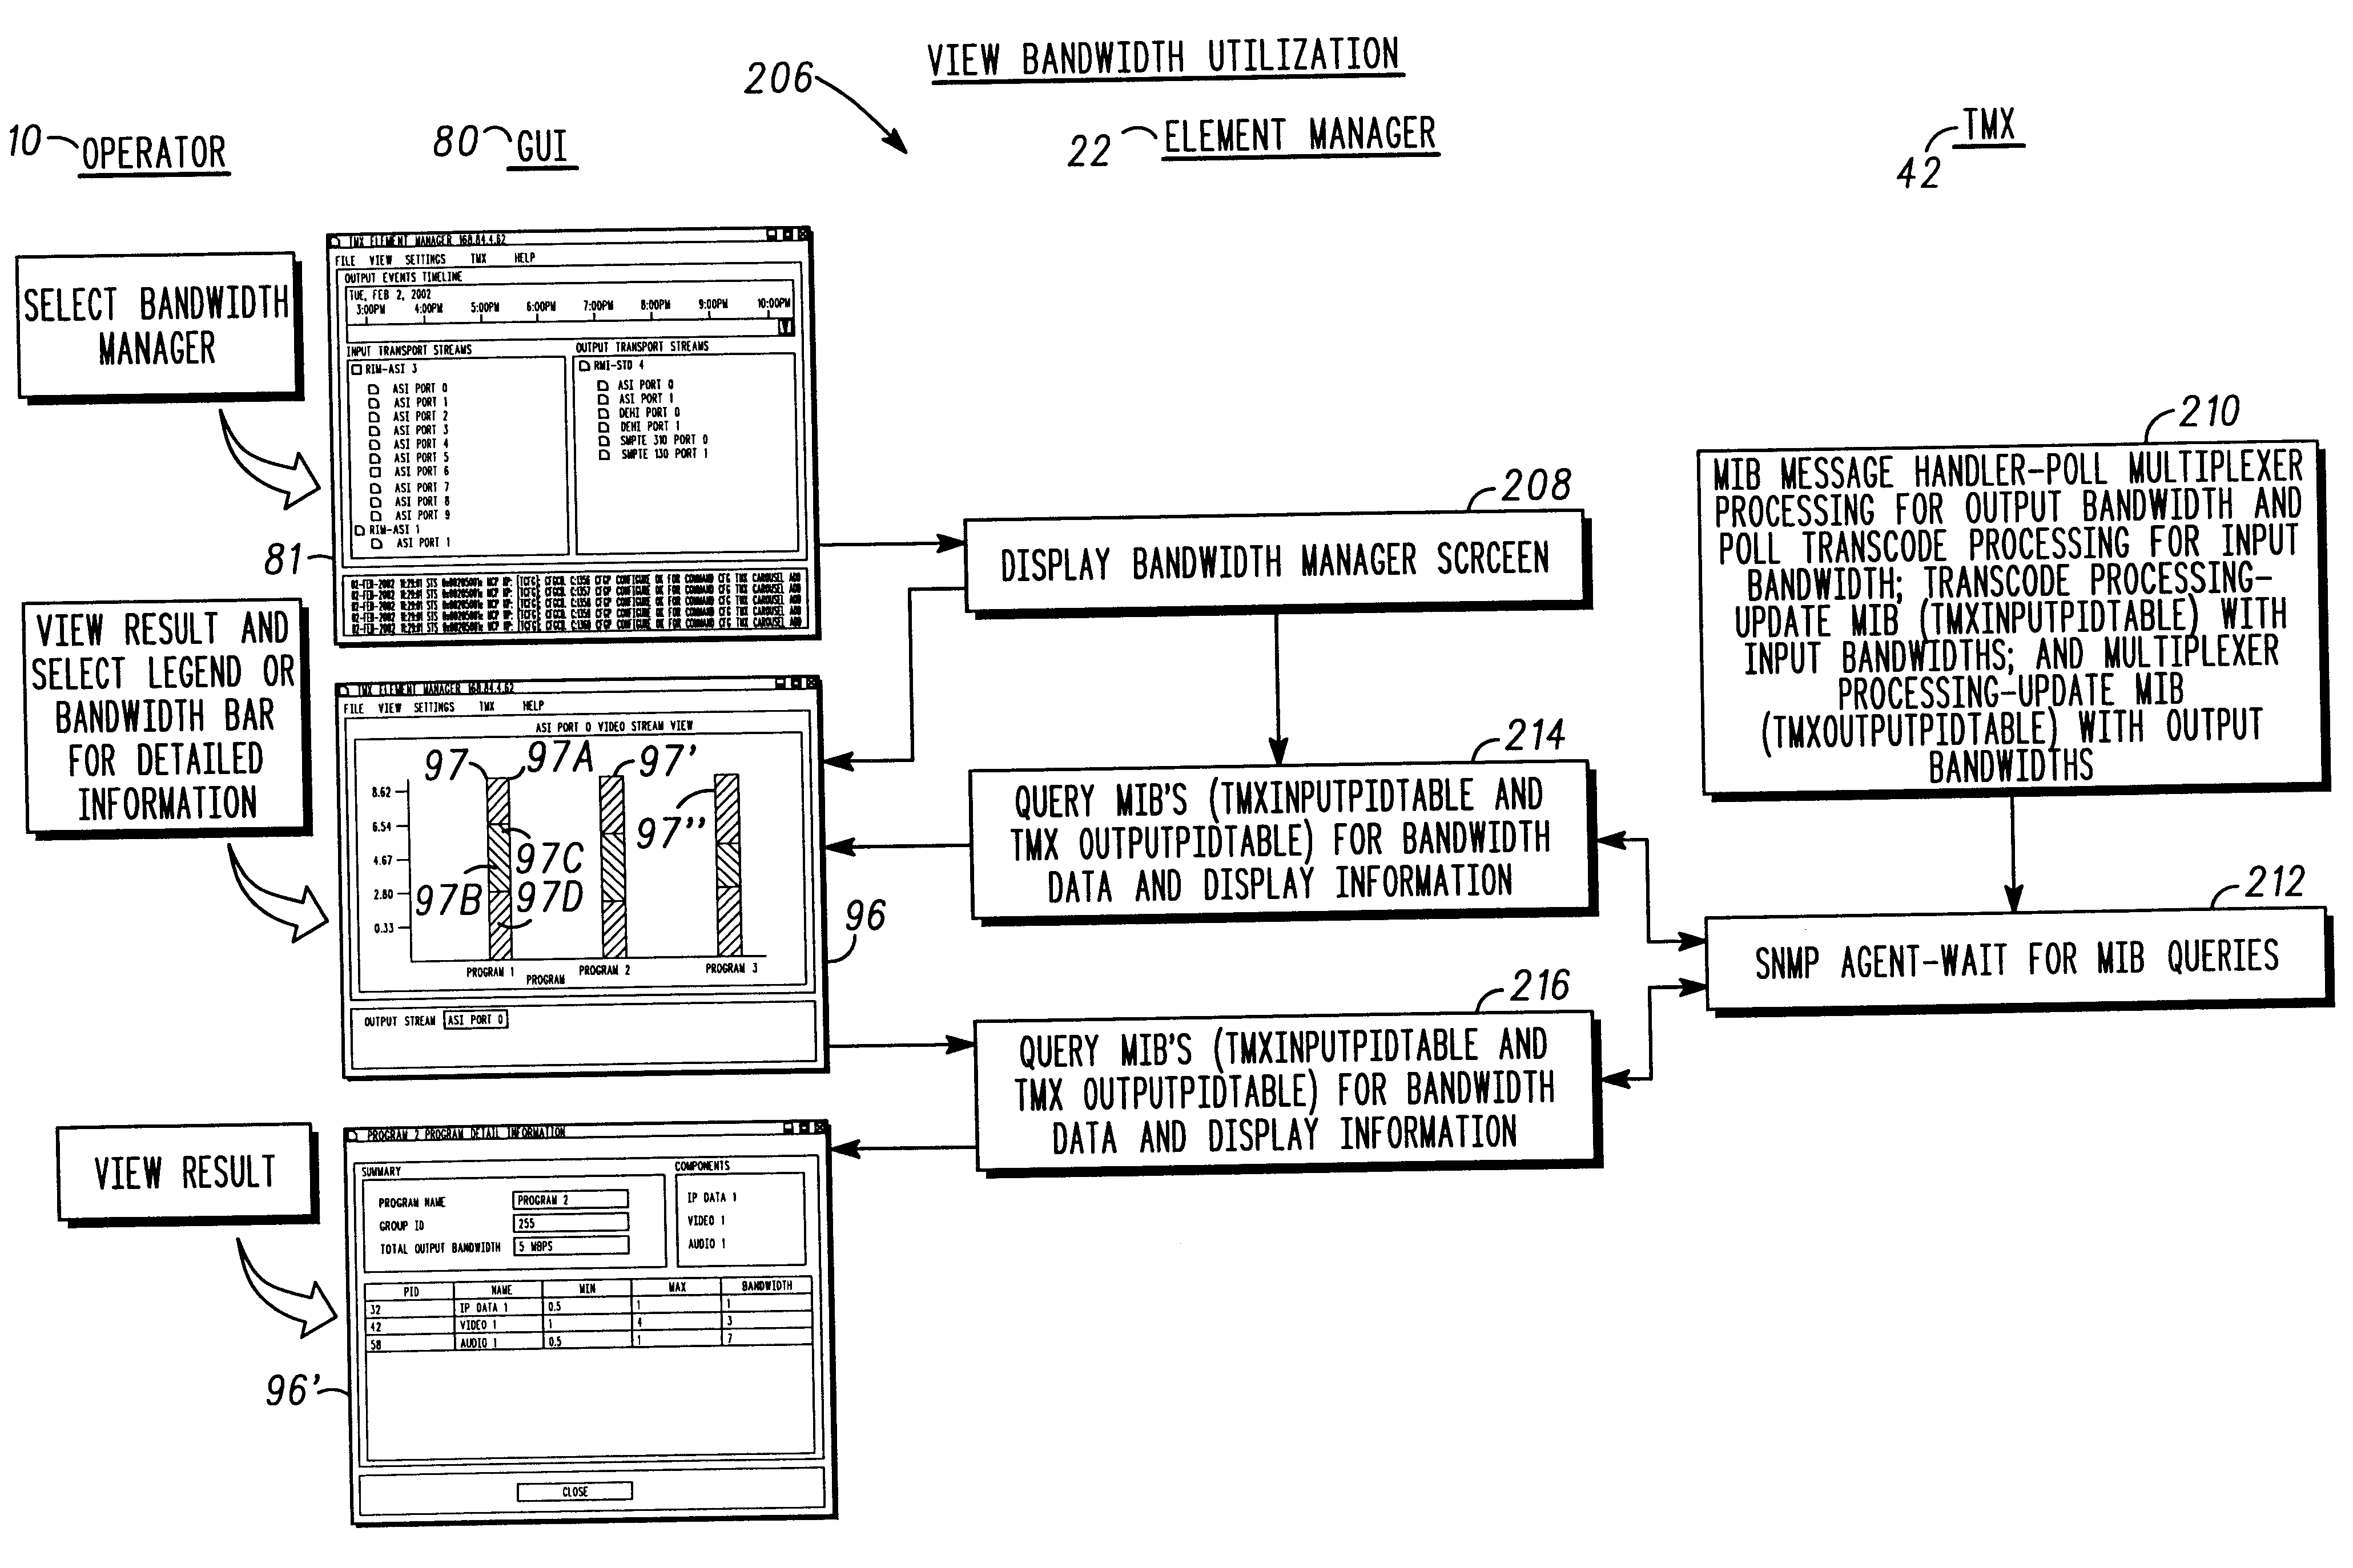 Real-time display of bandwidth utilization in a transport multiplexer